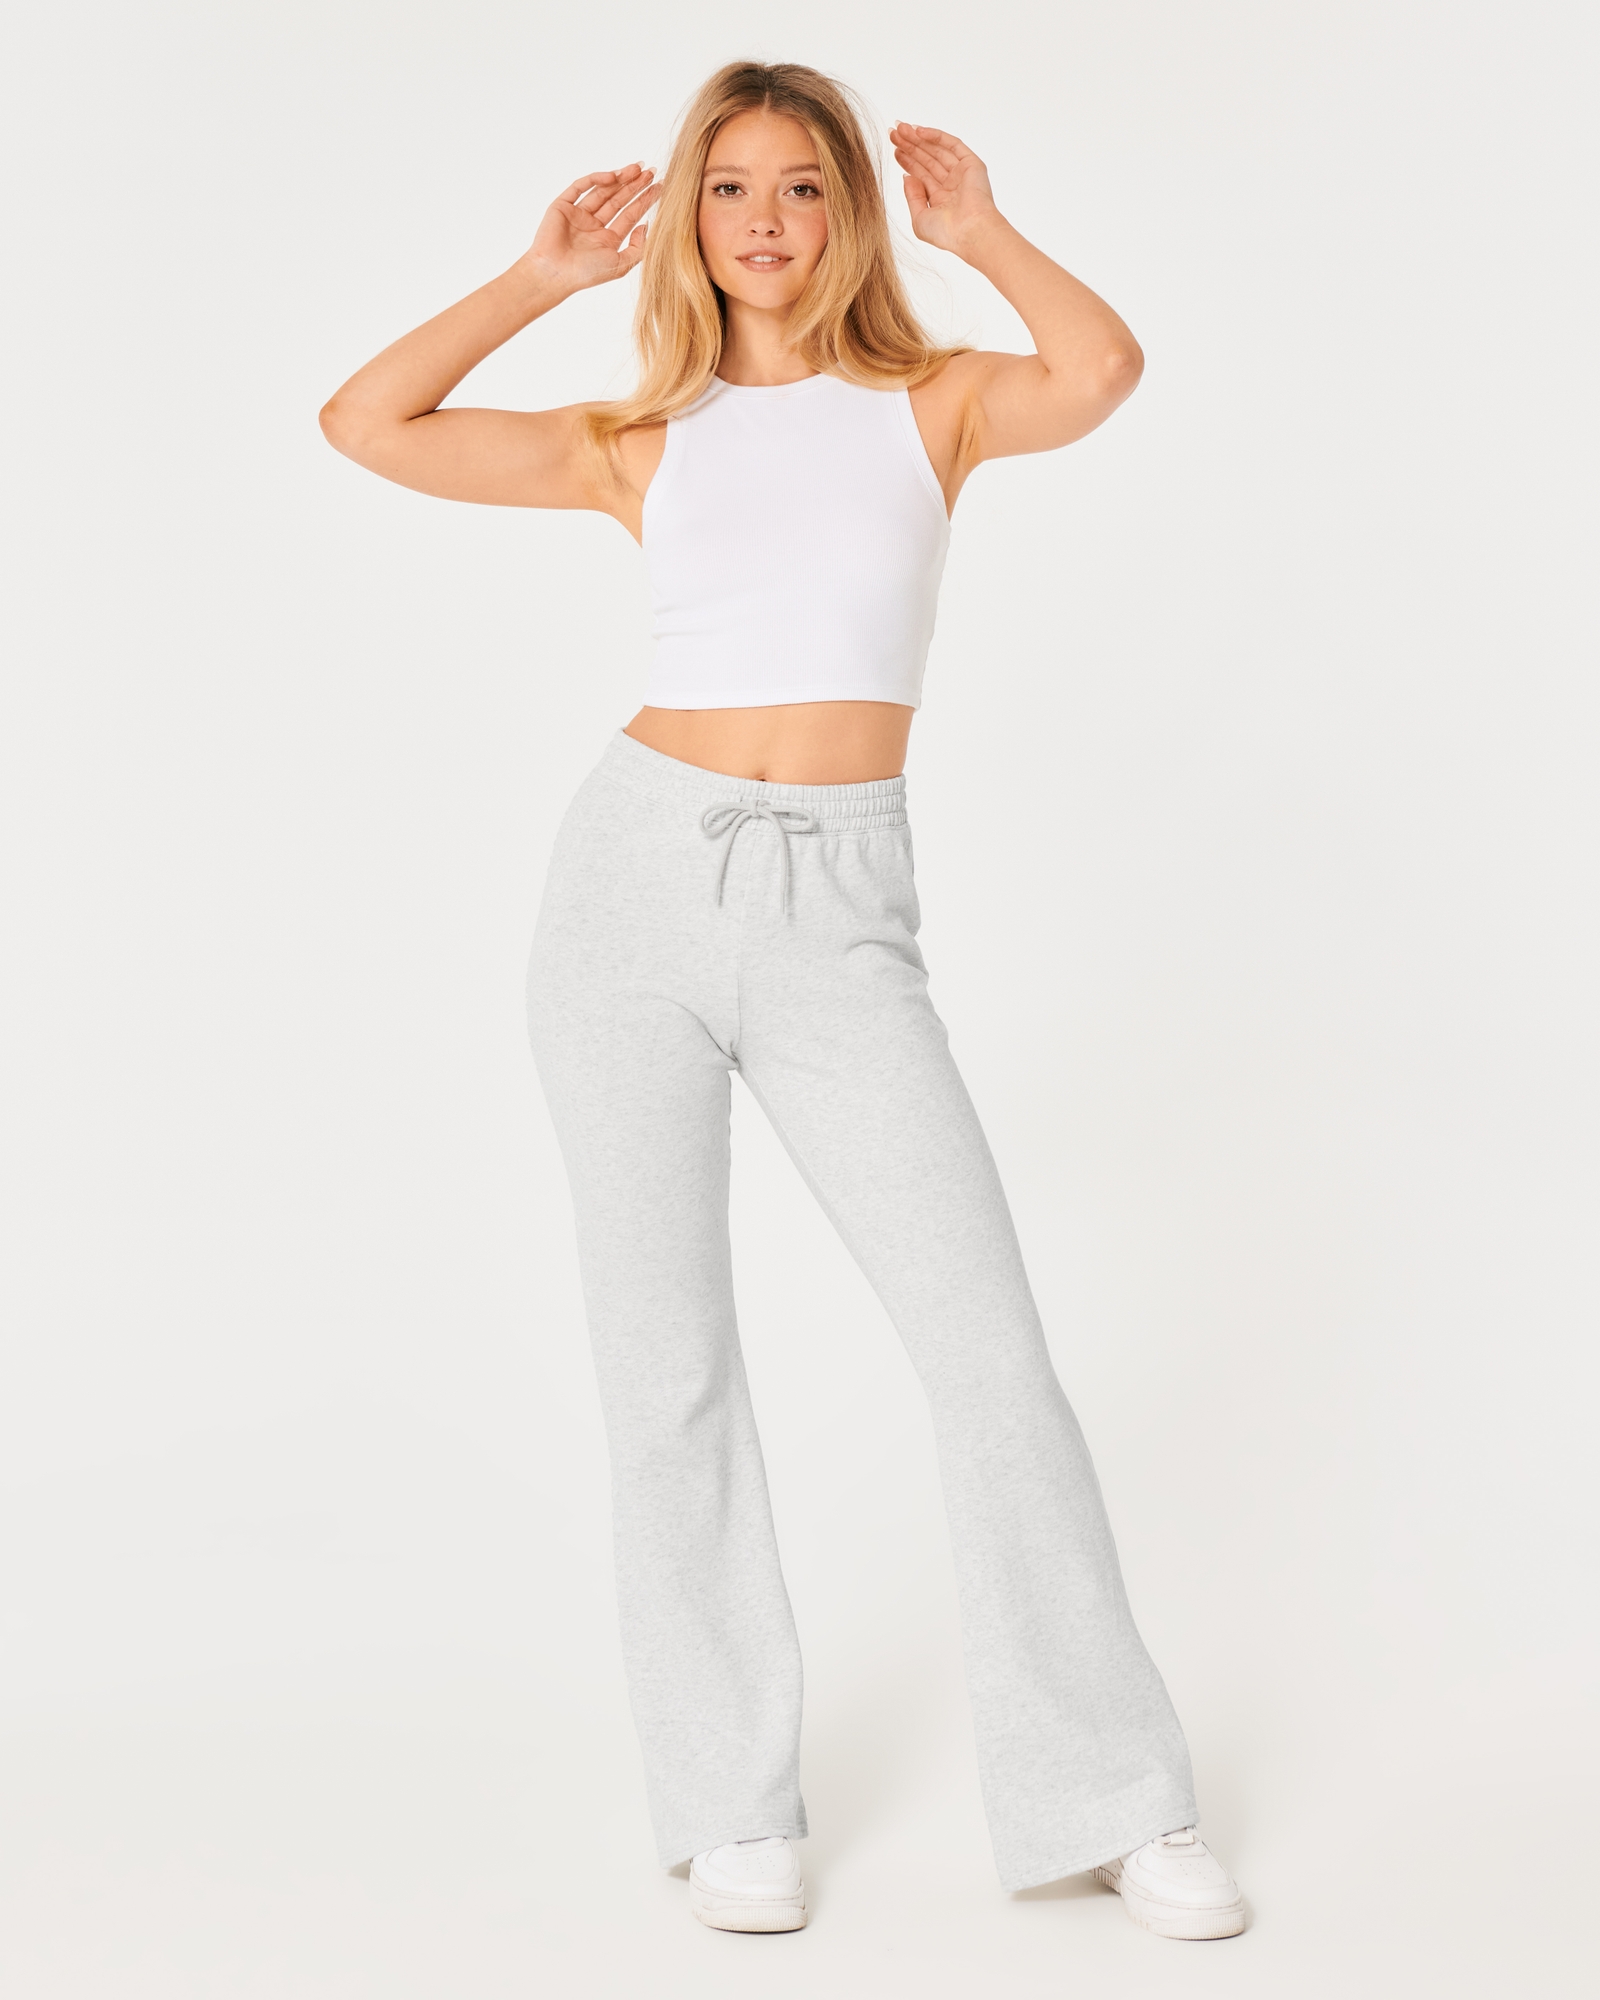 https://img.hollisterco.com/is/image/anf/KIC_347-3076-0901-112_model1.jpg?policy=product-extra-large